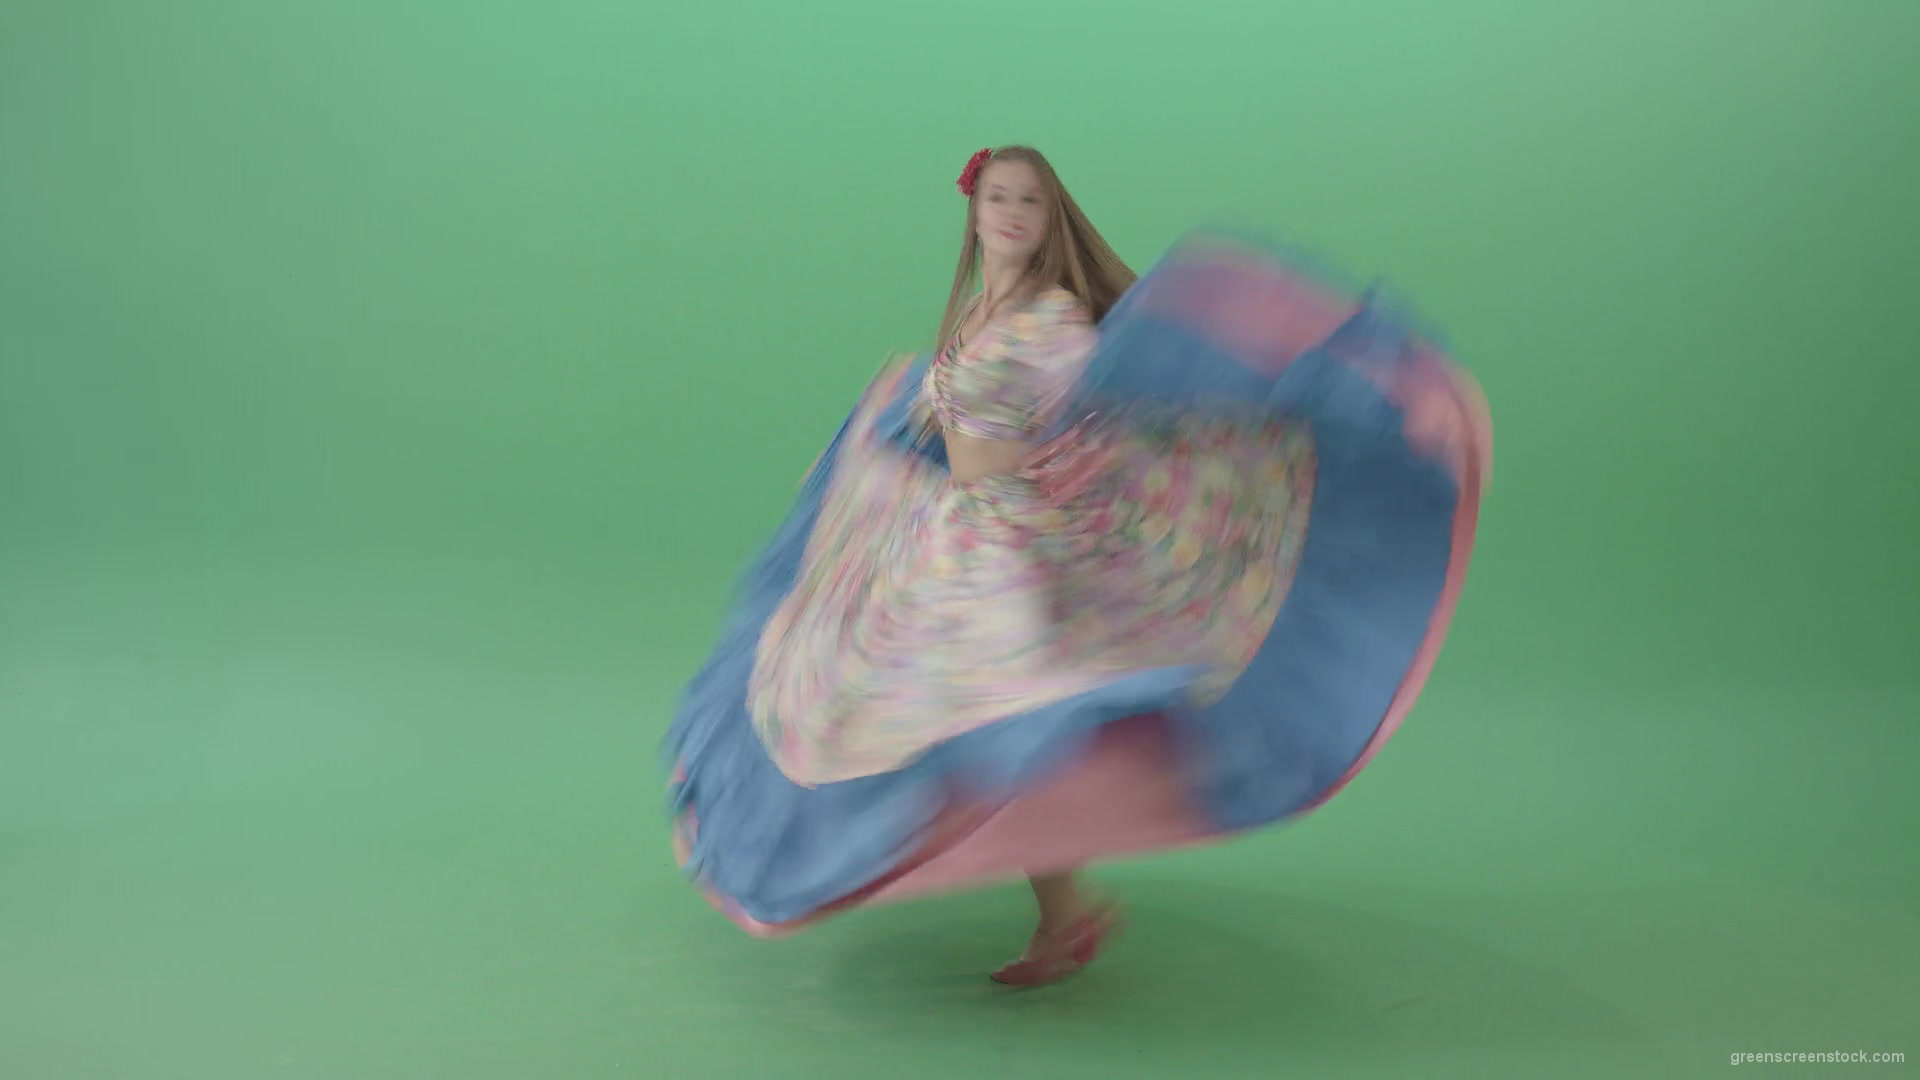 Balkan-Gipsy-Girl-spinning-and-dance-isolated-on-Green-Screen-4K-Video-Footage-1920_007 Green Screen Stock